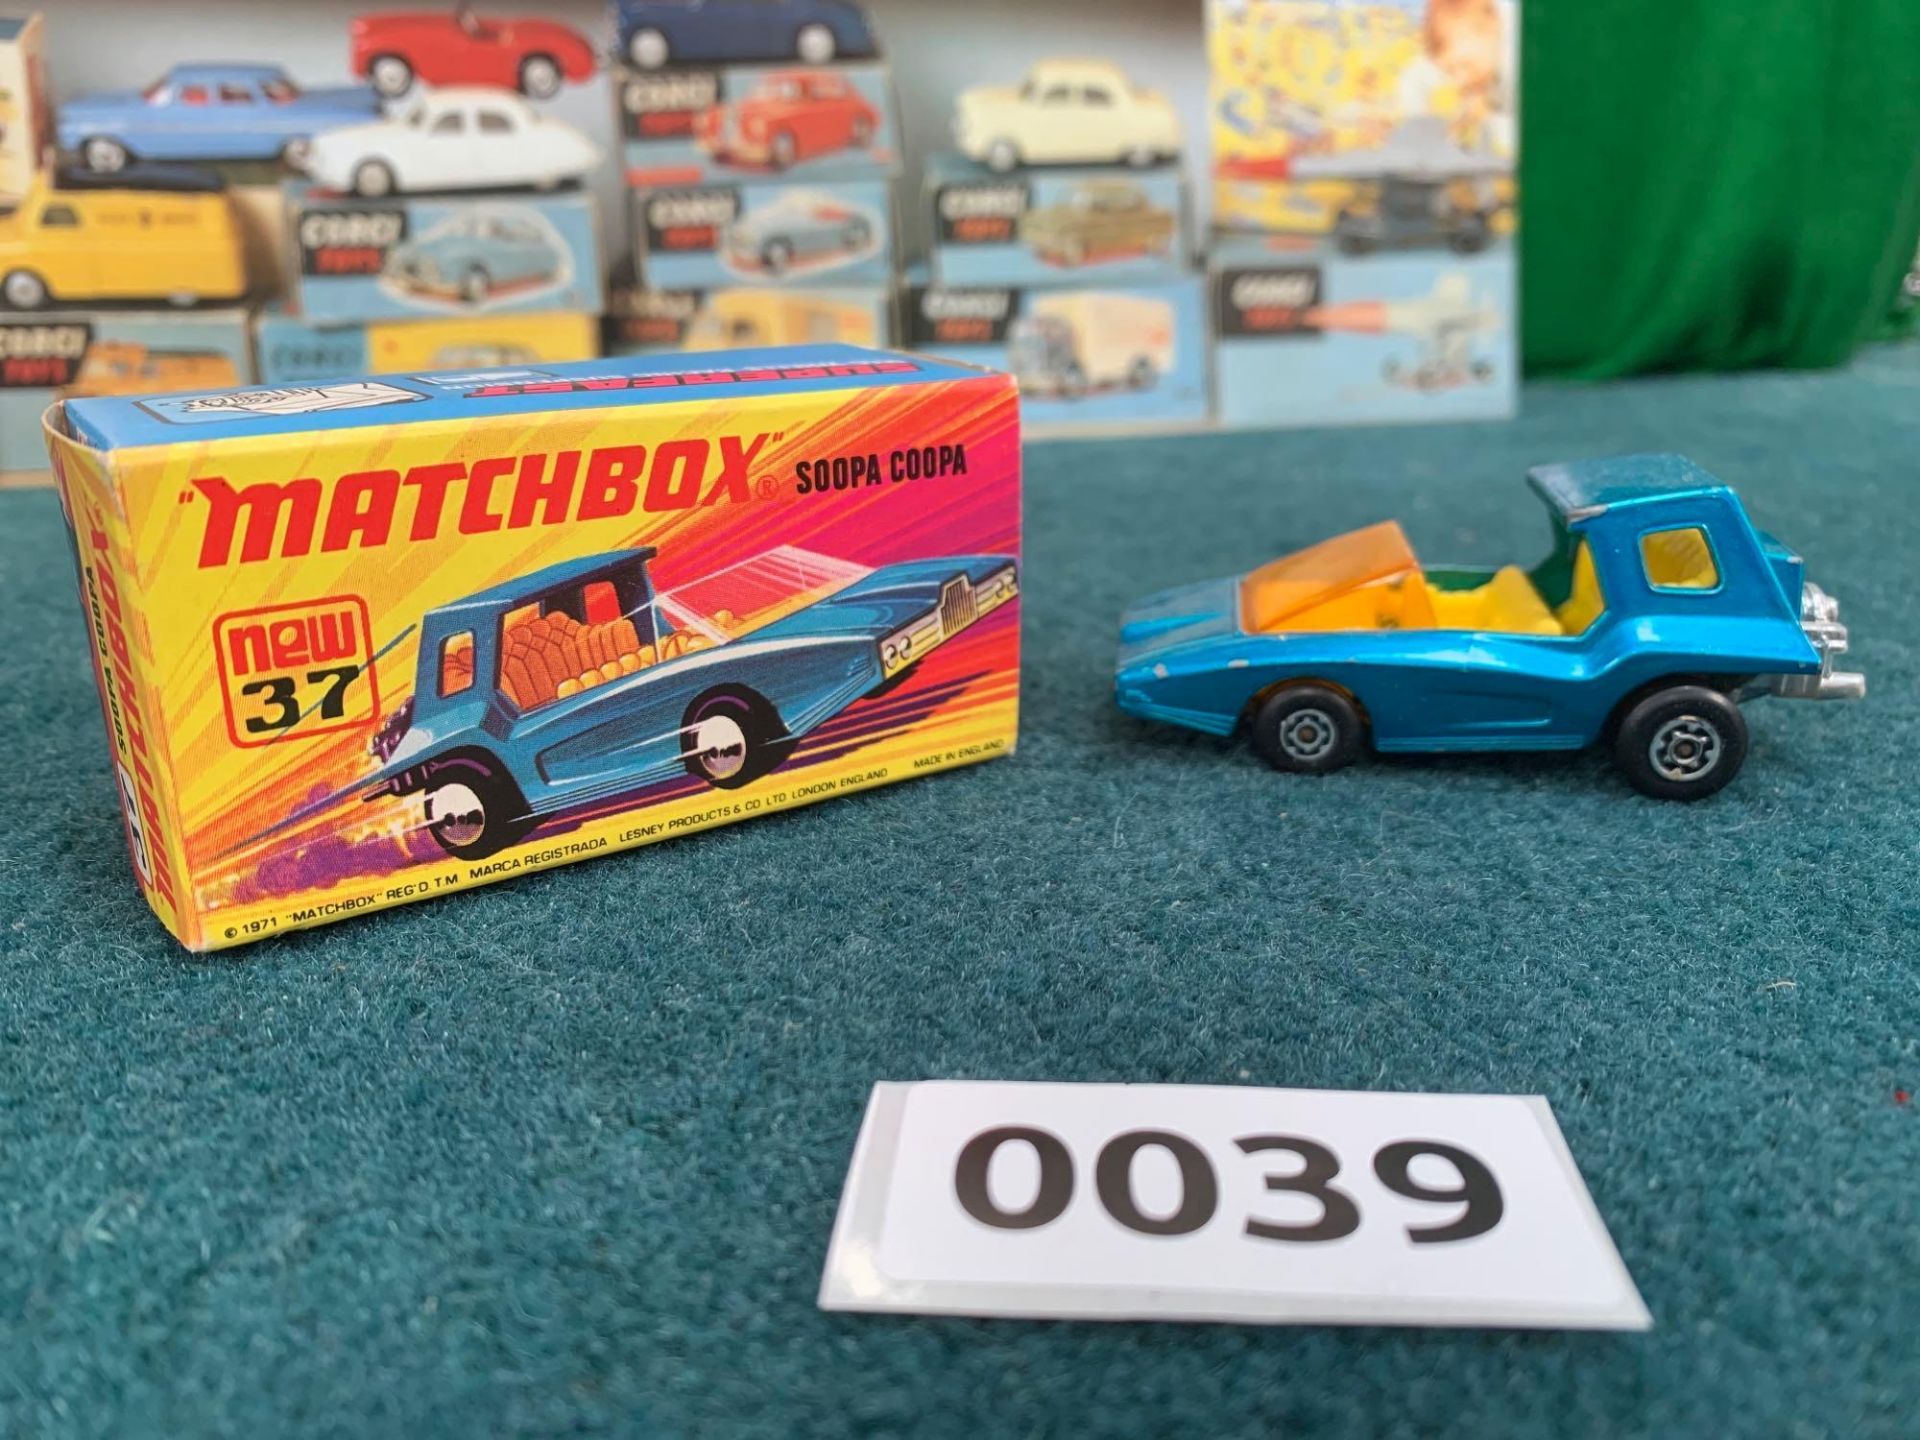 Matchbox 1972 Lesney Superfast Diecast Toy Car Soopa Coopa No. 37